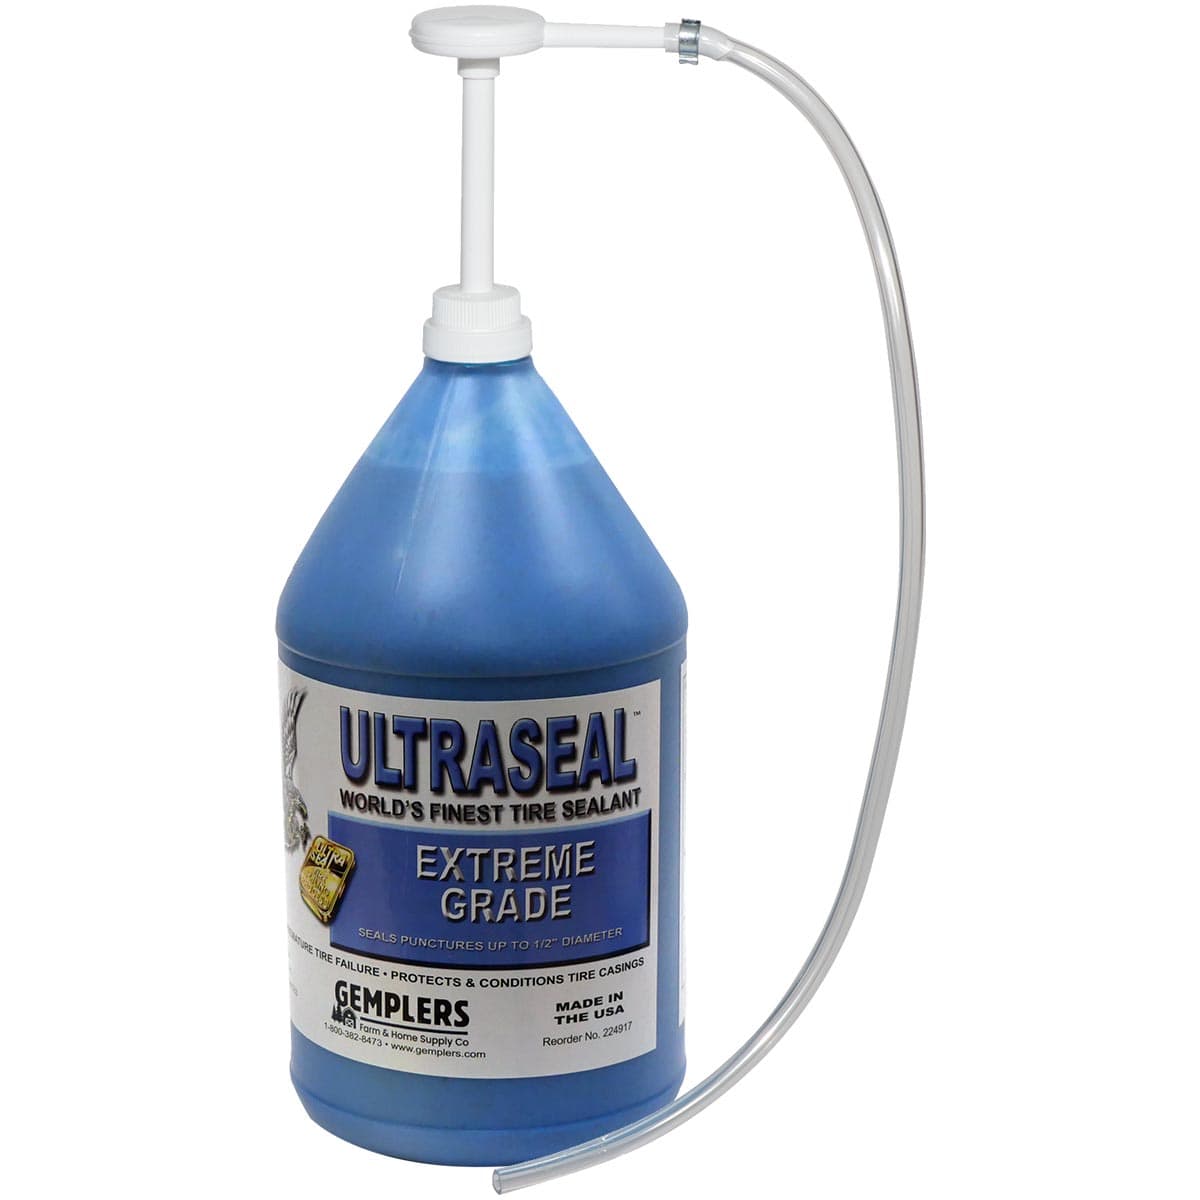 Ultraseal Extreme Grade Tire Sealant, 1 gal.